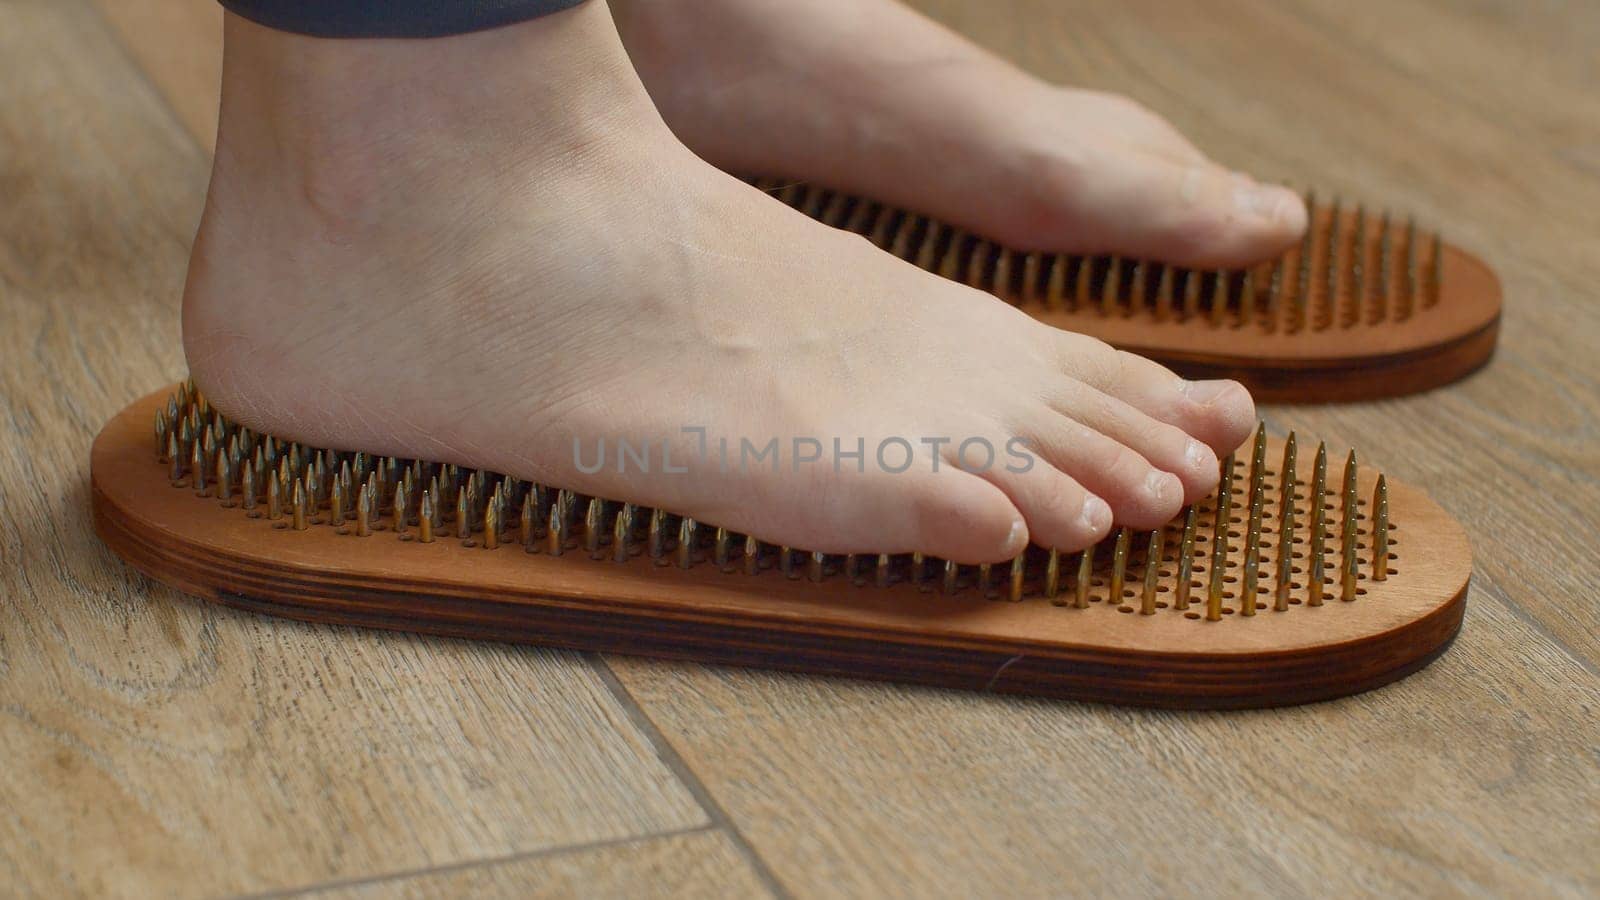 Female feet standing on boards with nails, close up. Media. Barefoot female standing on yoga nails board. by Mediawhalestock